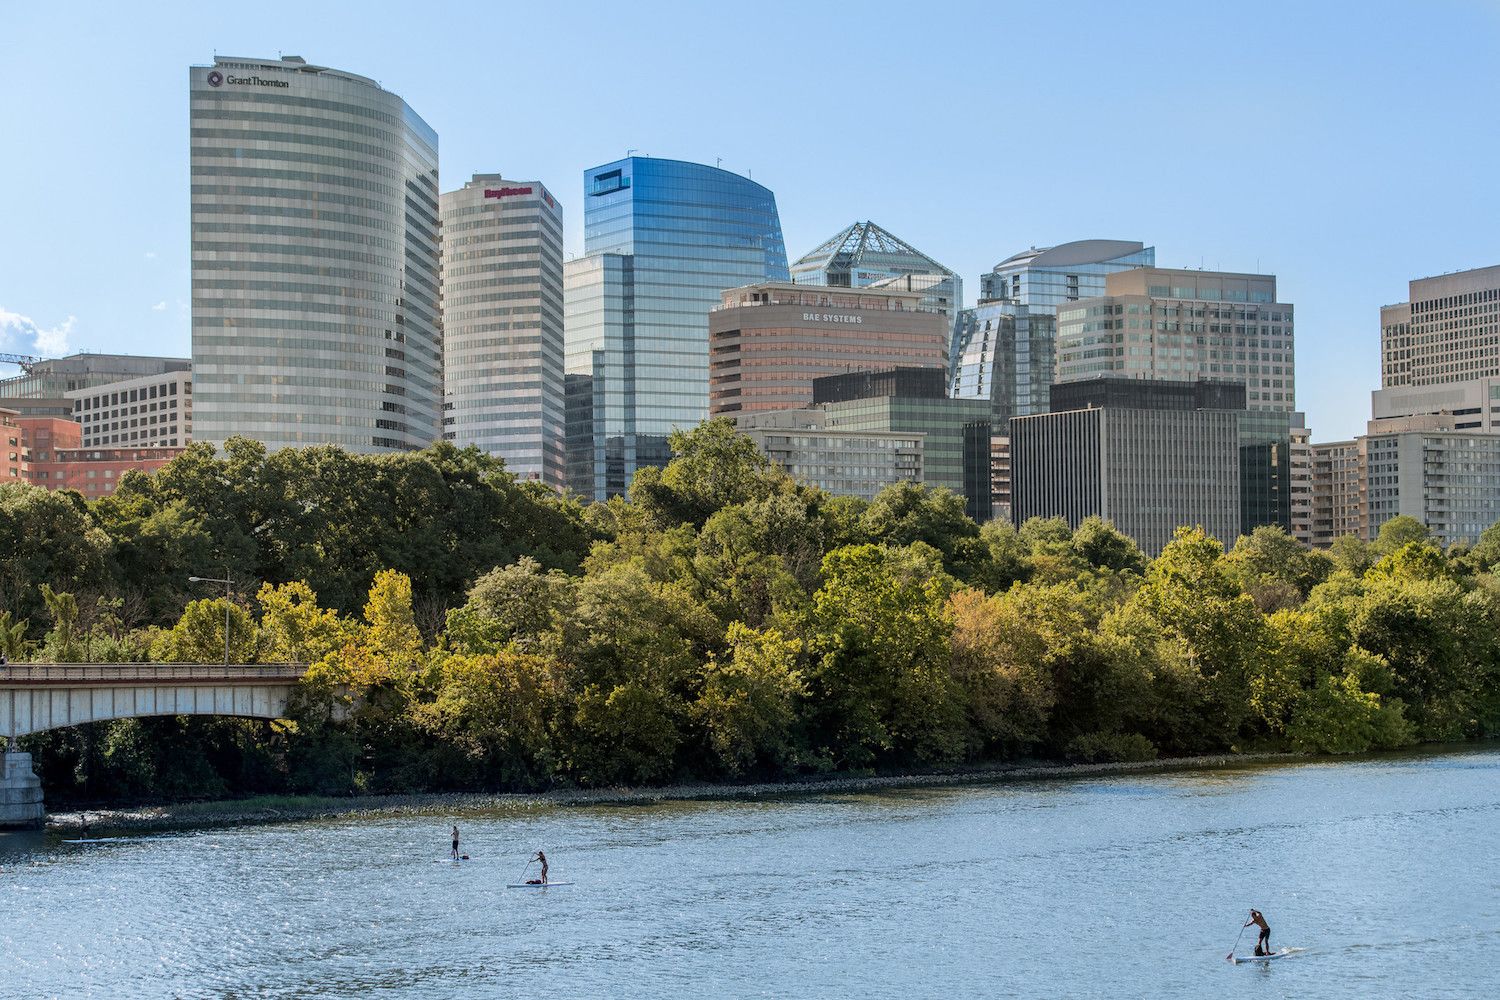 Local parks nearby including Theodore Roosevelt Island